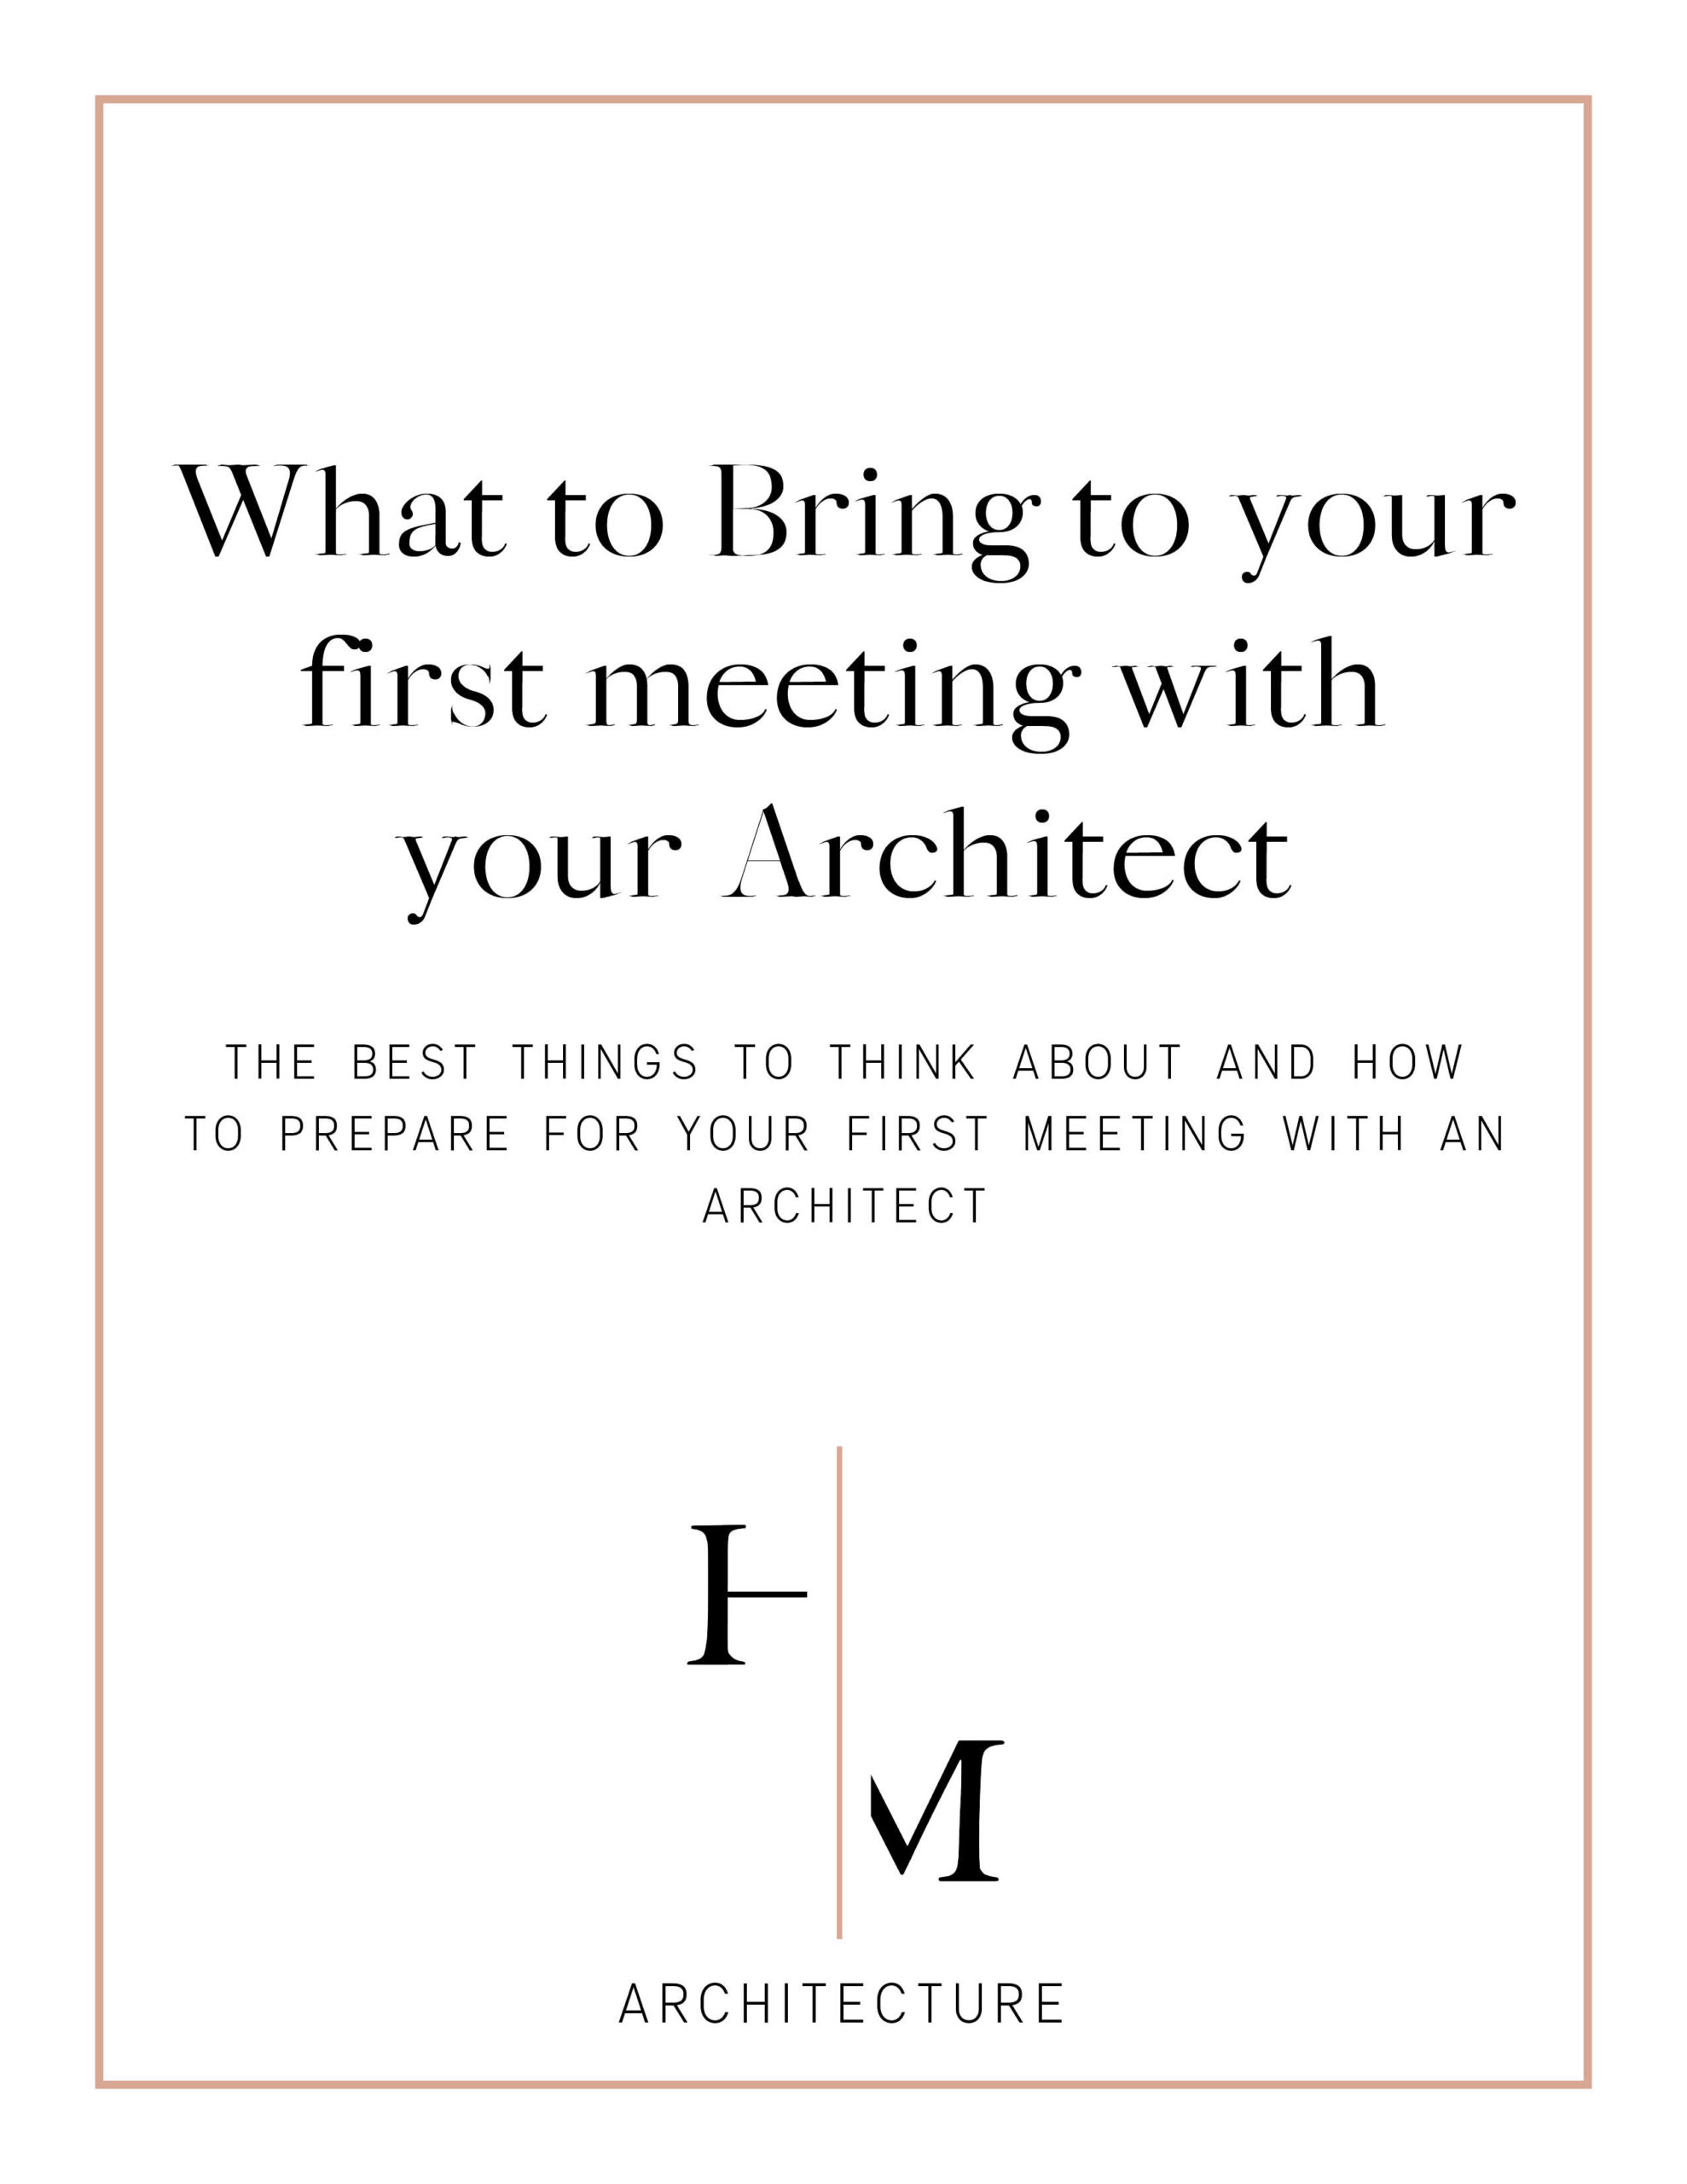 Prep for your first meeting with an architect